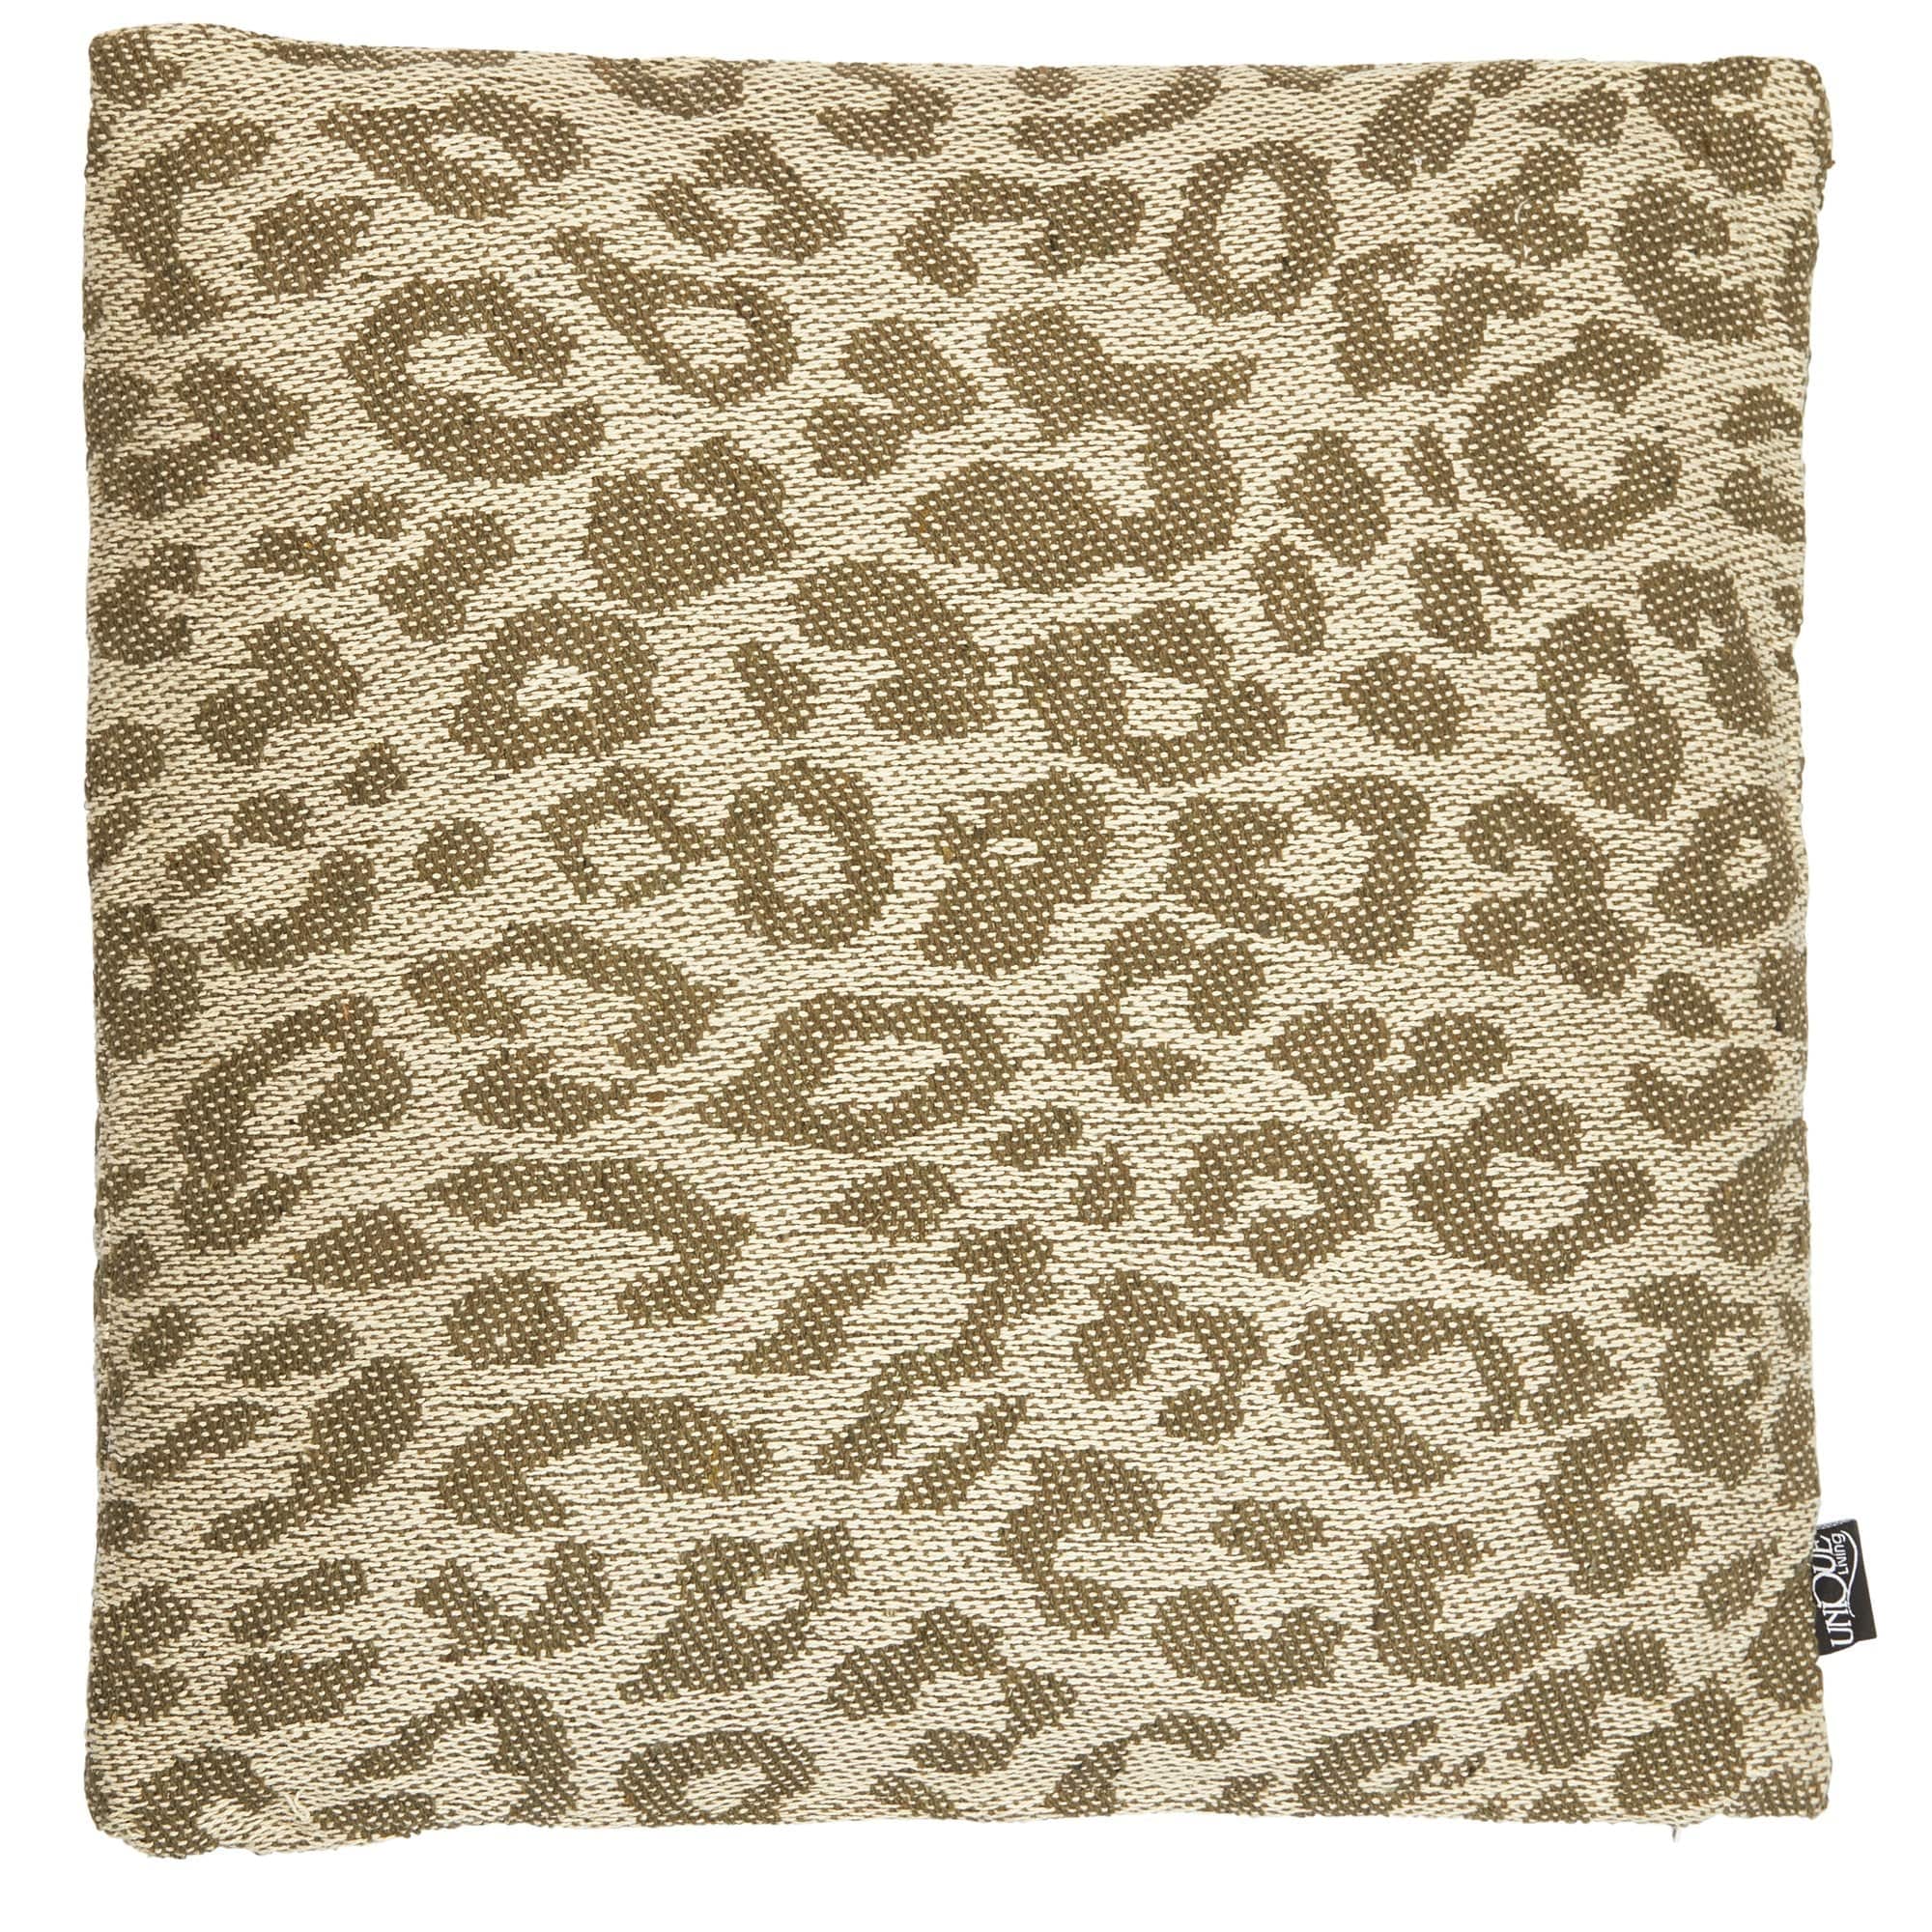 Mayfly Green Leopard Print Cushion - 45 x 45cm 8714503324687 only5pounds-com